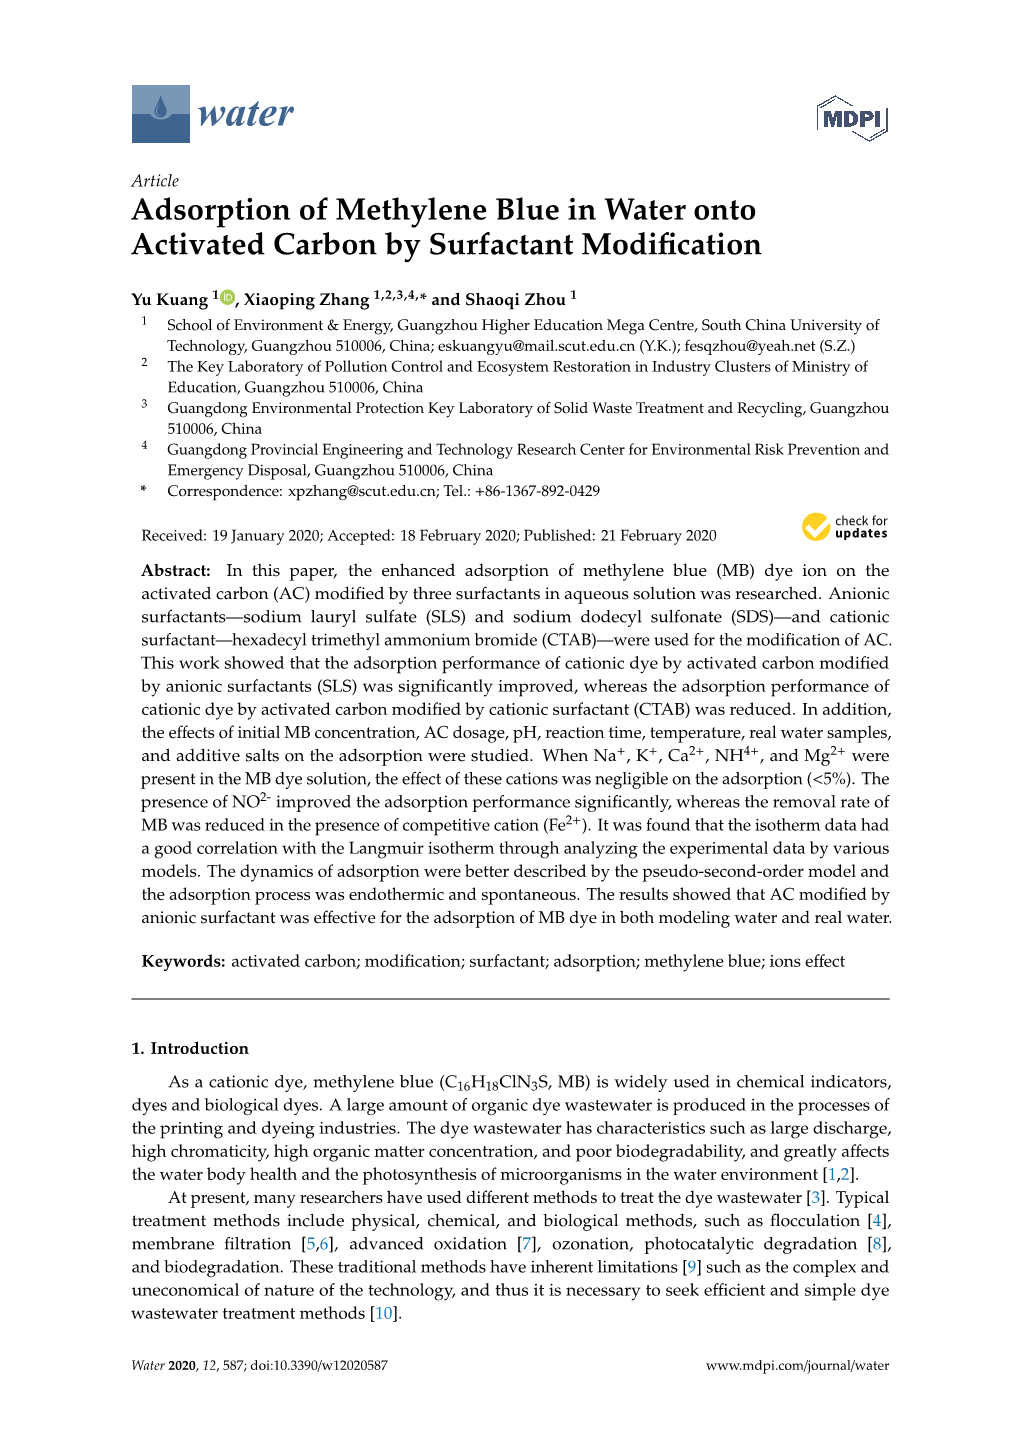 Adsorption of Methylene Blue in Water Onto Activated Carbon by Surfactant Modiﬁcation